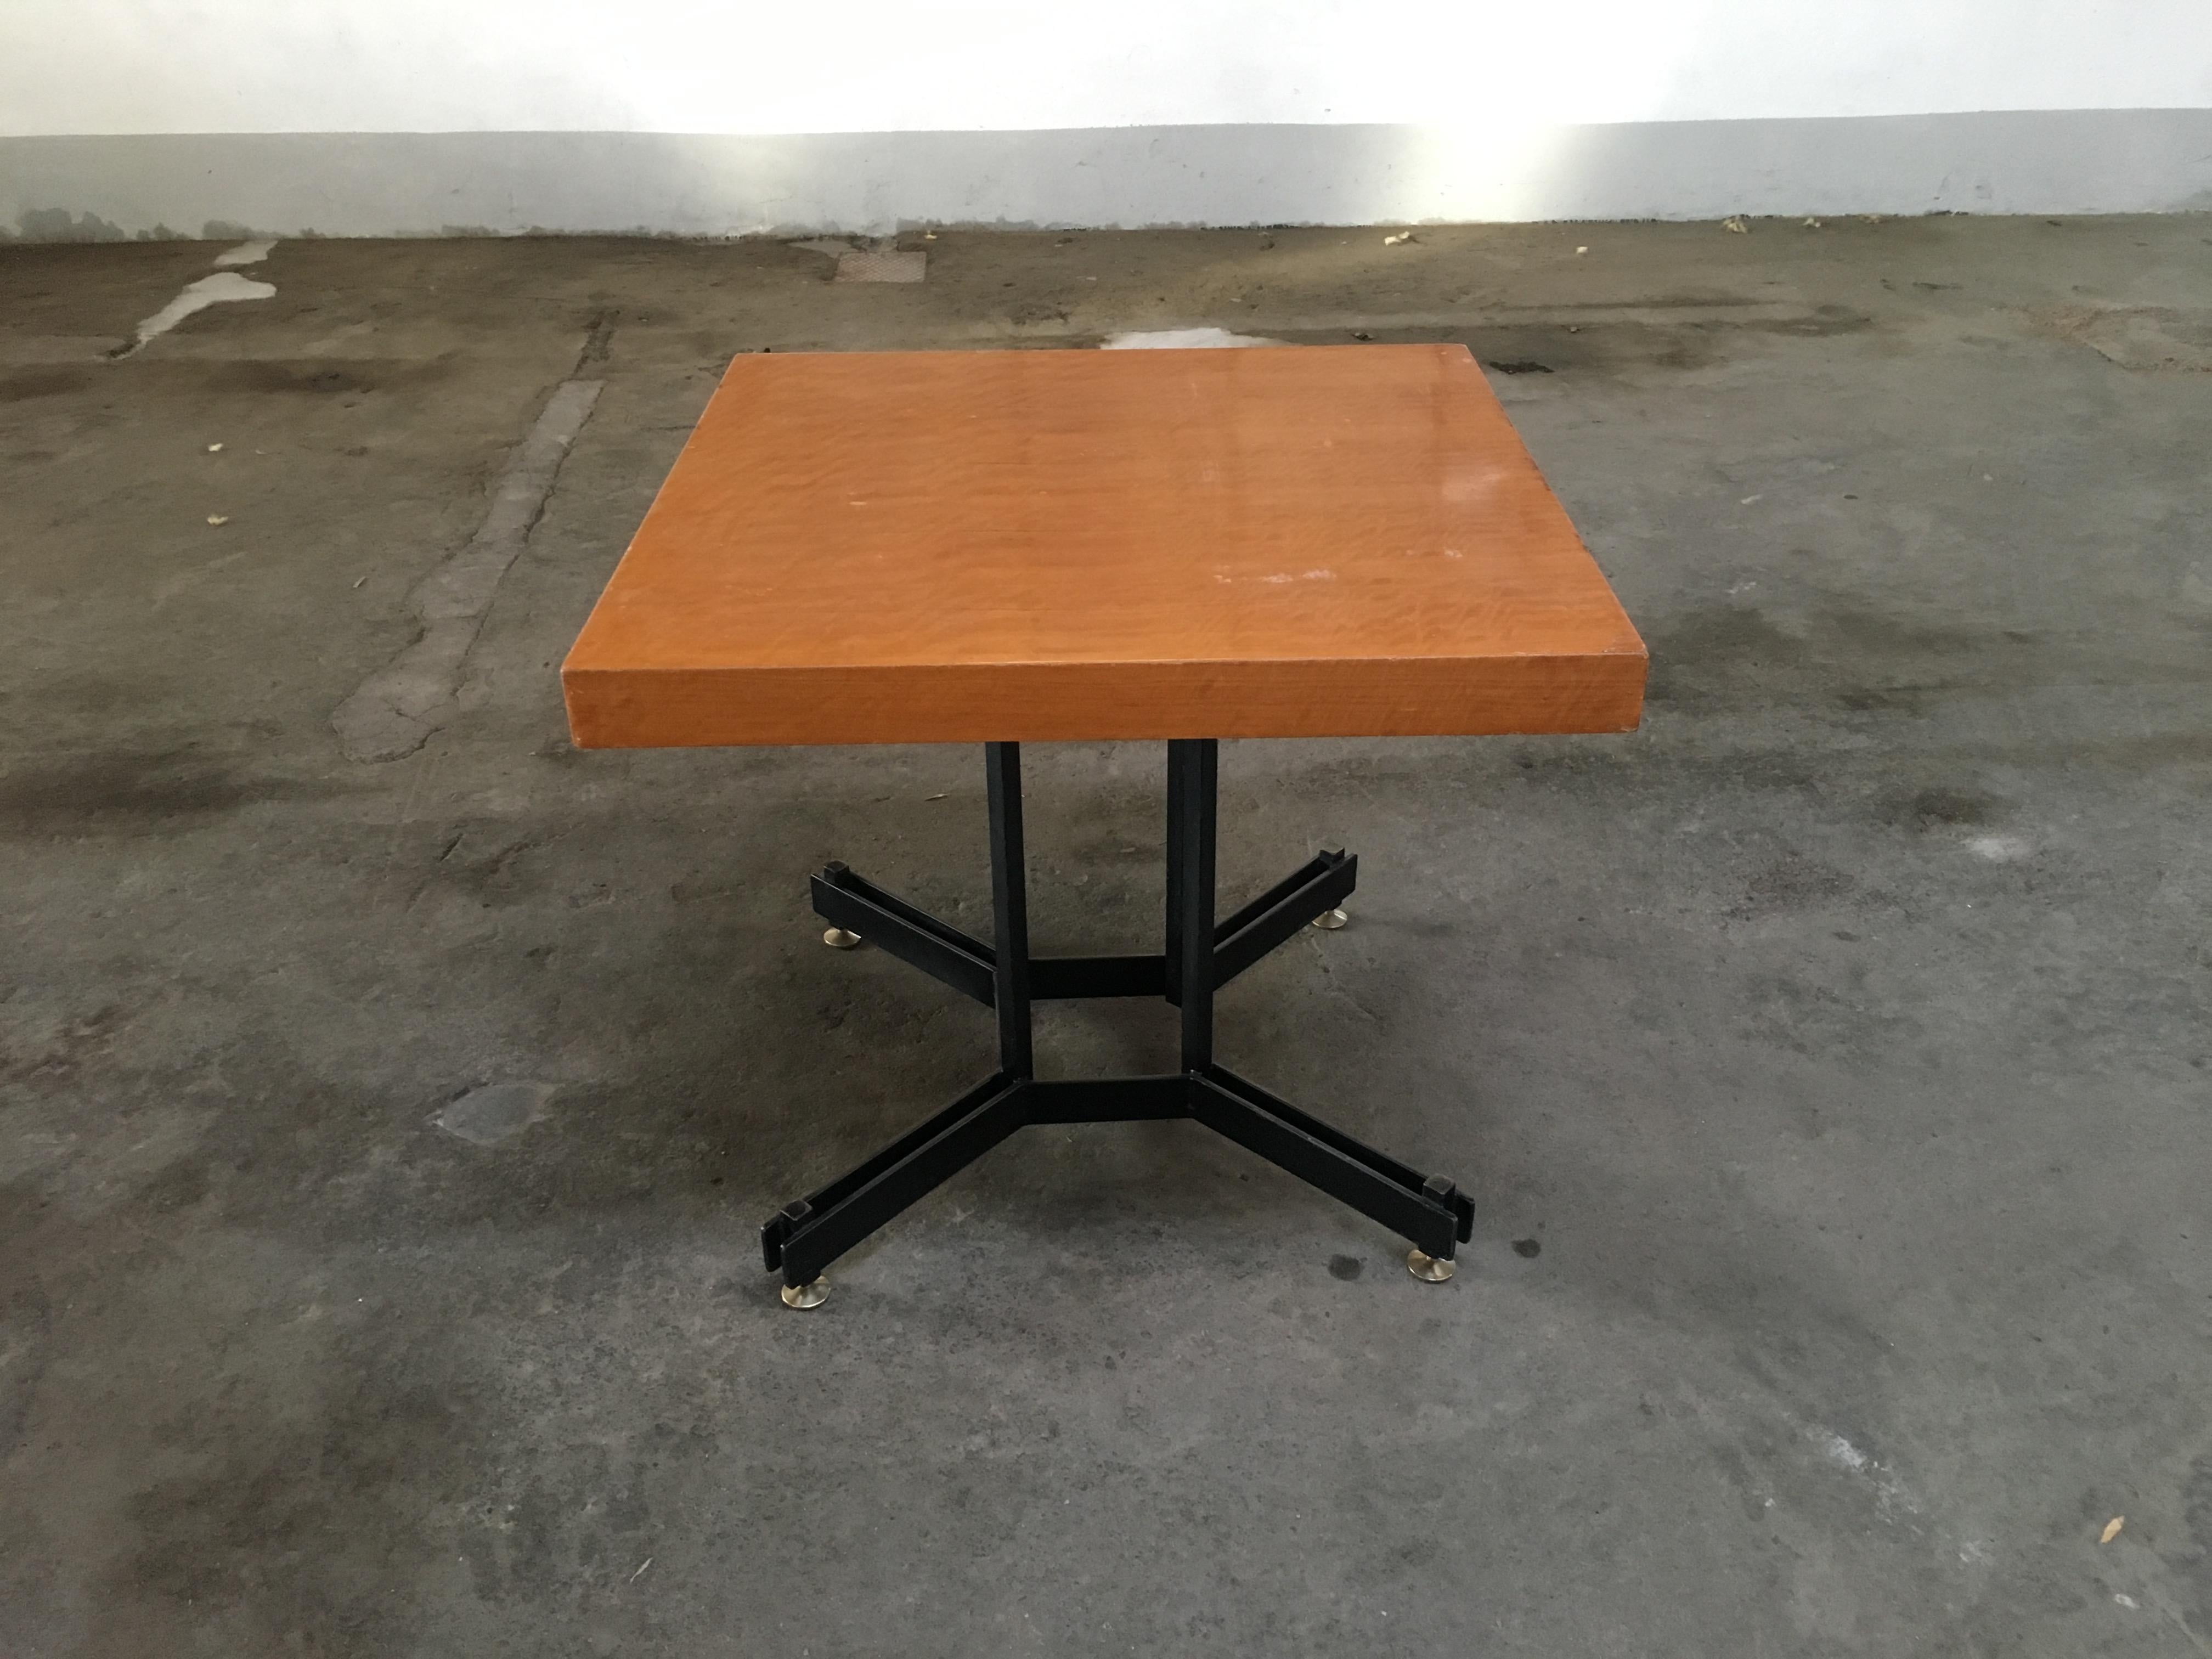 Mid-Century Modern Italian black iron base table with wood top and brass feet. 1970s
The wooden top of the table shows some wear due to age and use.